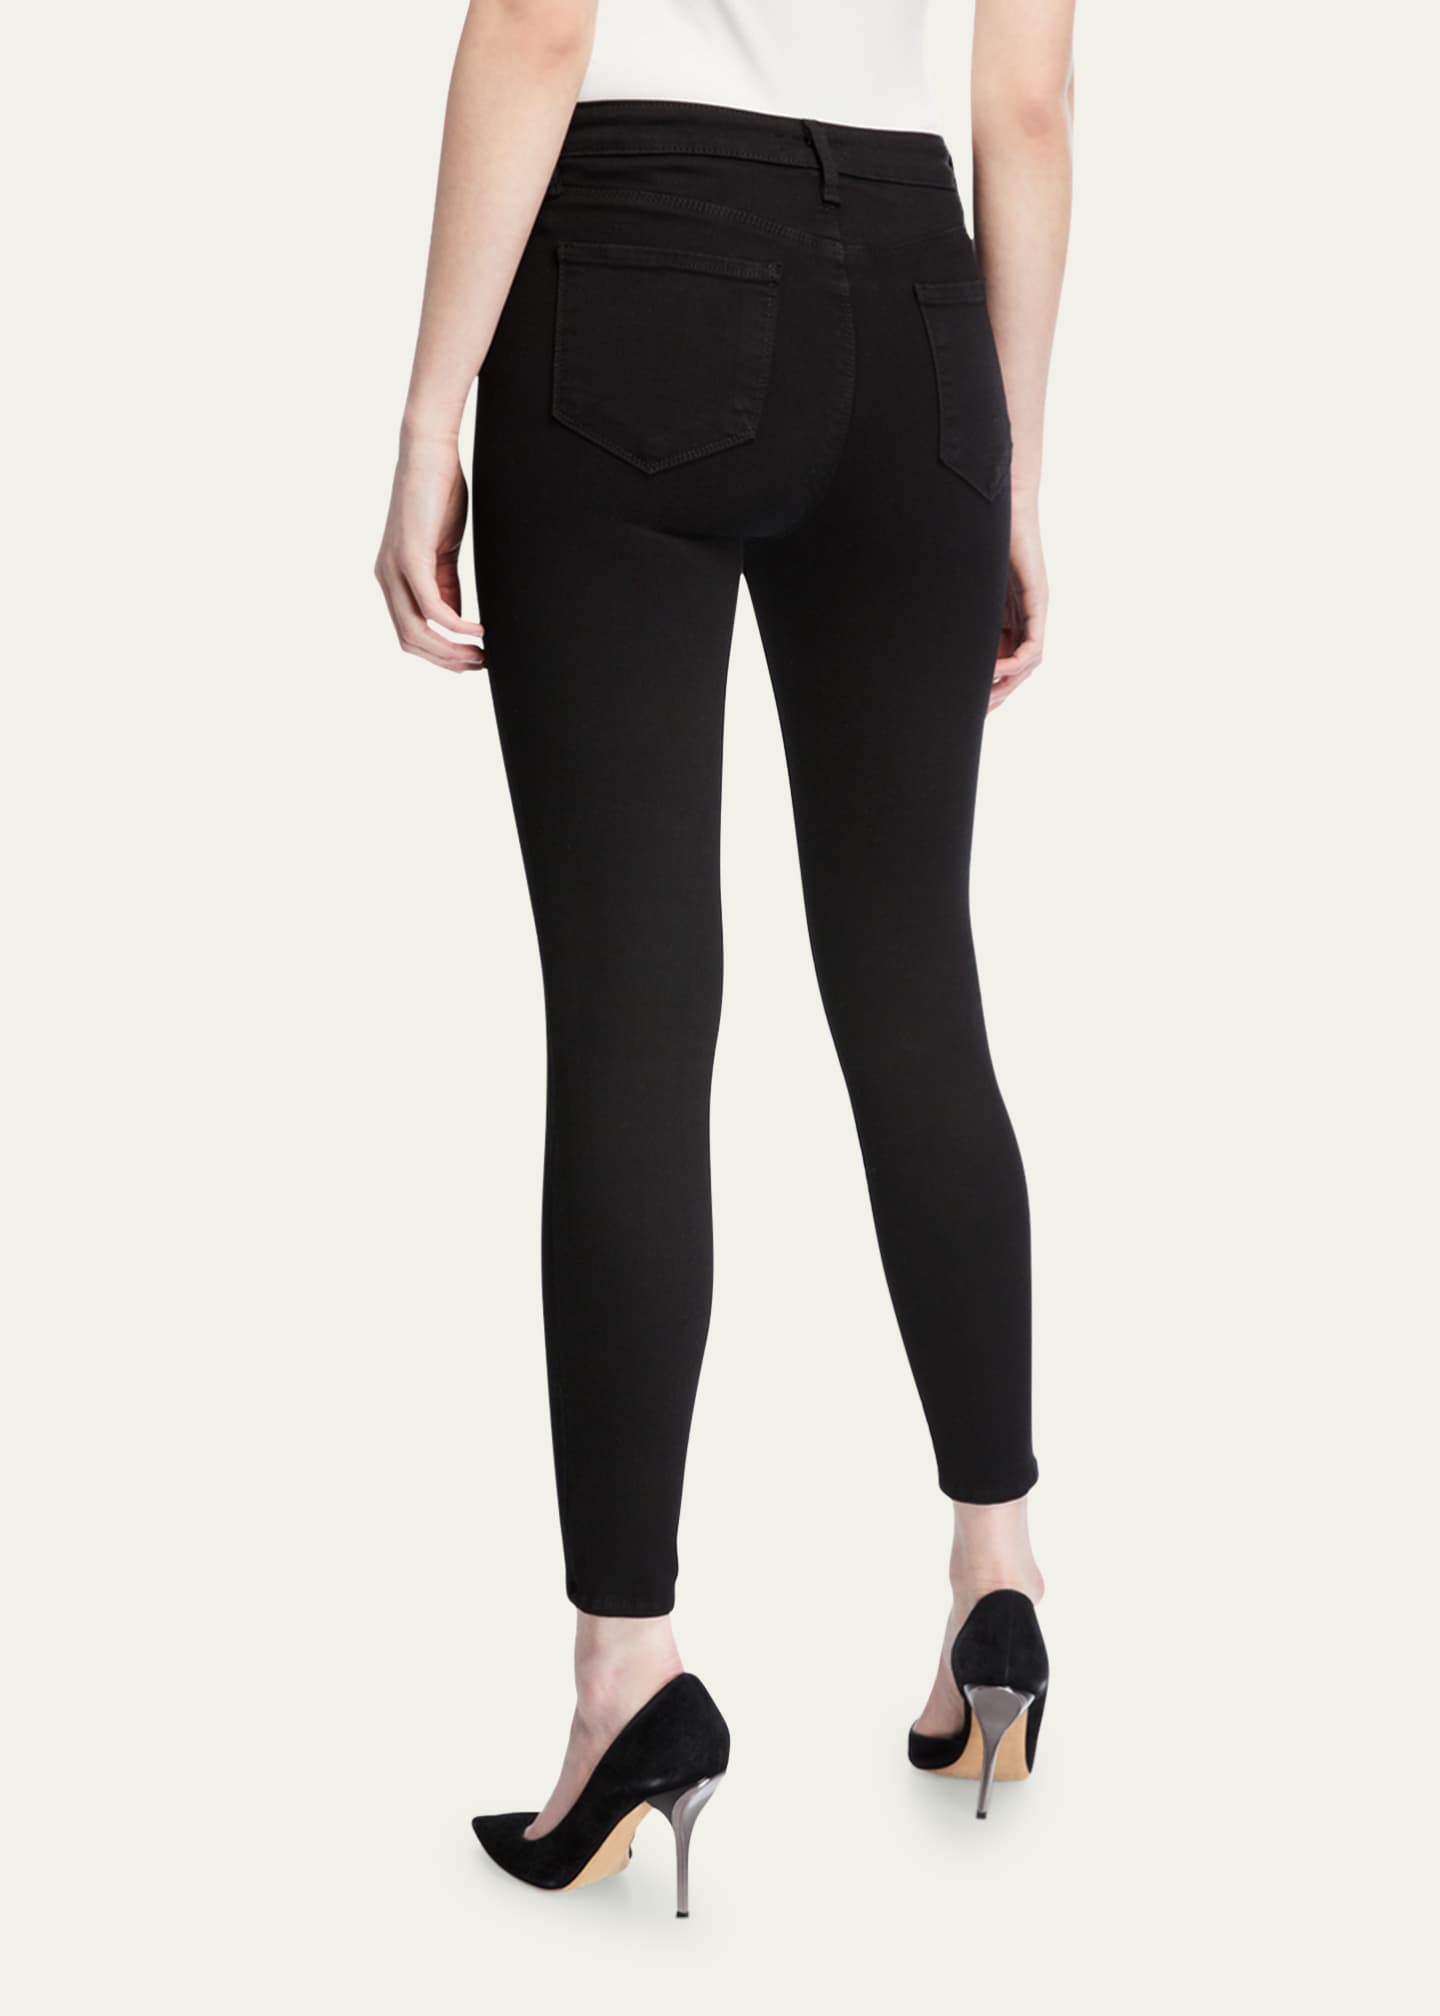 L'Agence Margot High-Rise Skinny Ankle Jeans Image 3 of 5